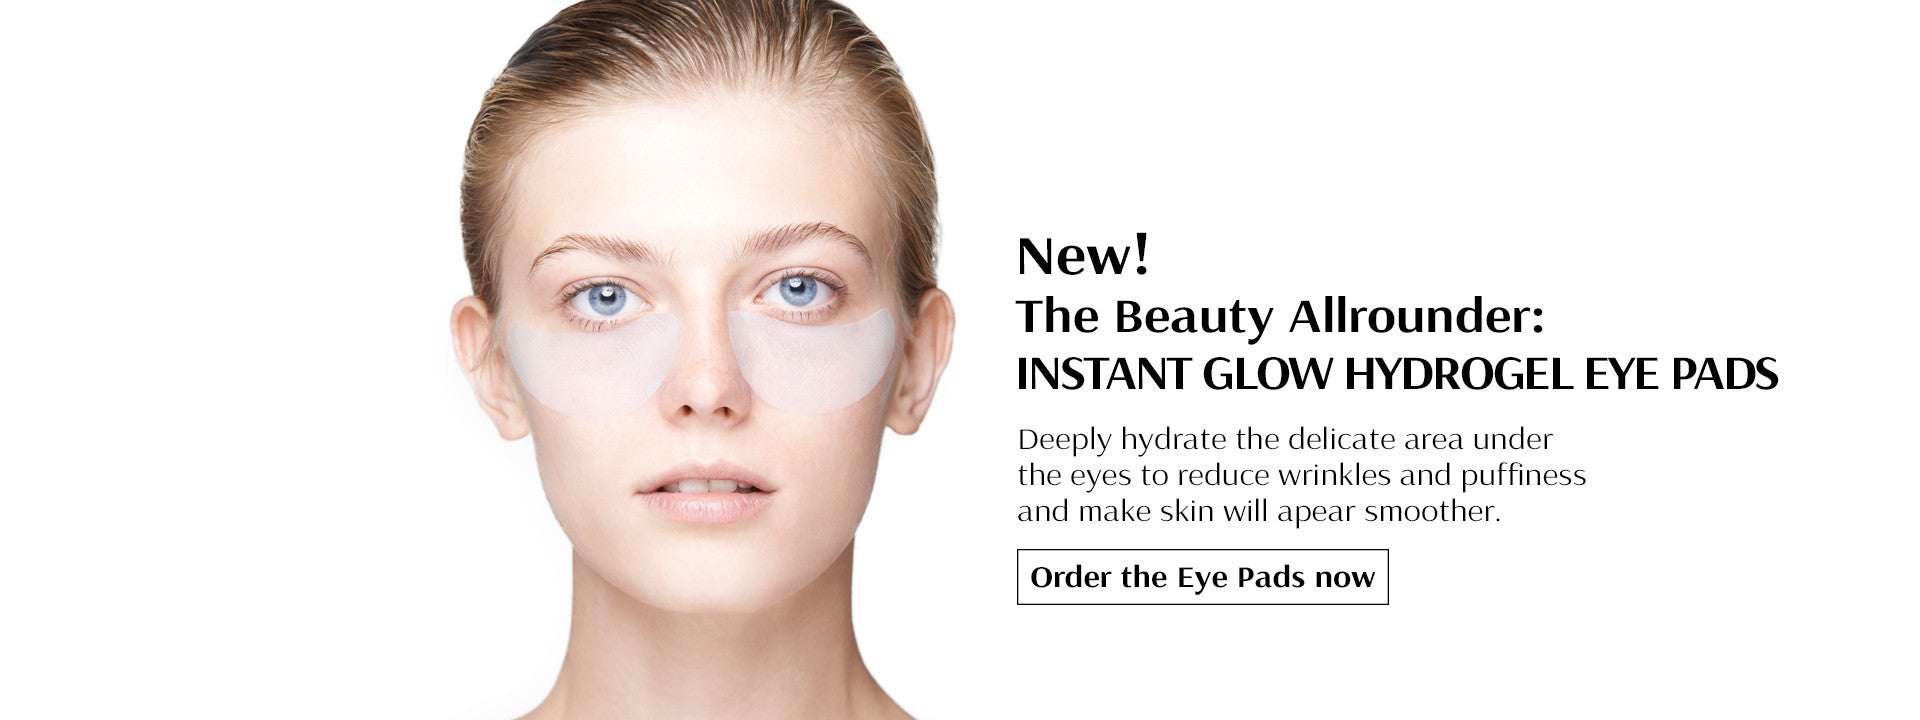 NSTANT GLOW HYDROGEL EYE PADS The hydrogel eye pads are a beauty allrounder! Wrinkles become smoother, dark circles get minimized, tear sacs and swellings are reduced